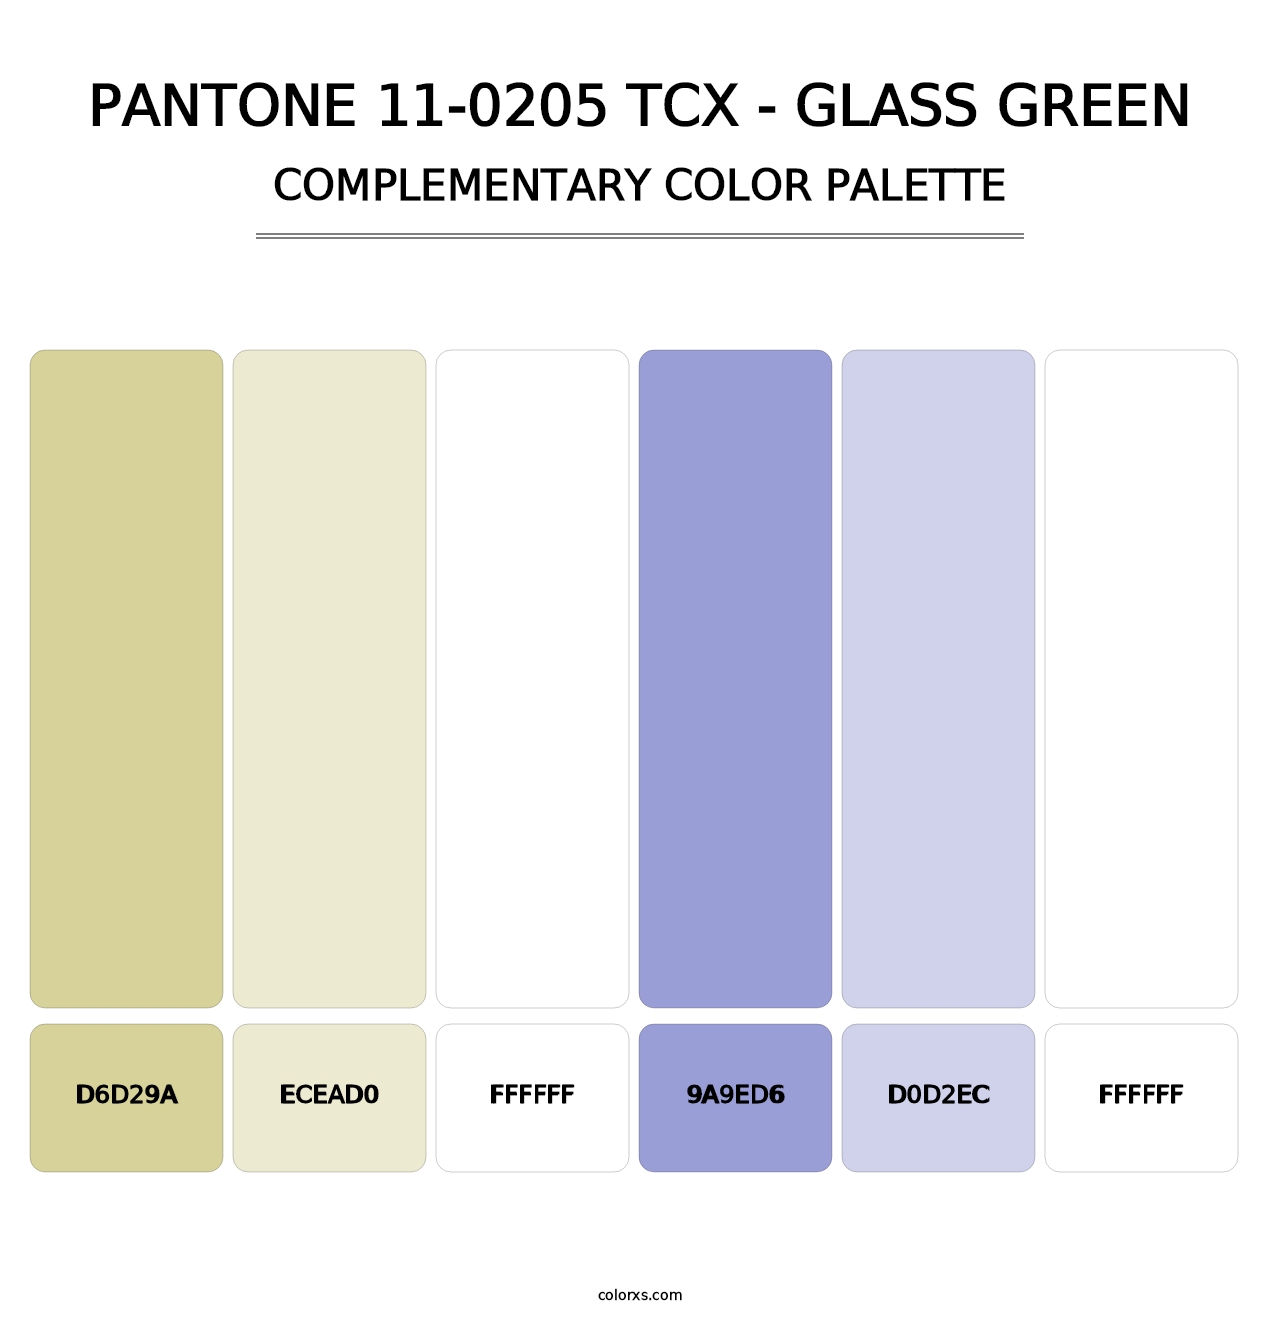 PANTONE 11-0205 TCX - Glass Green - Complementary Color Palette